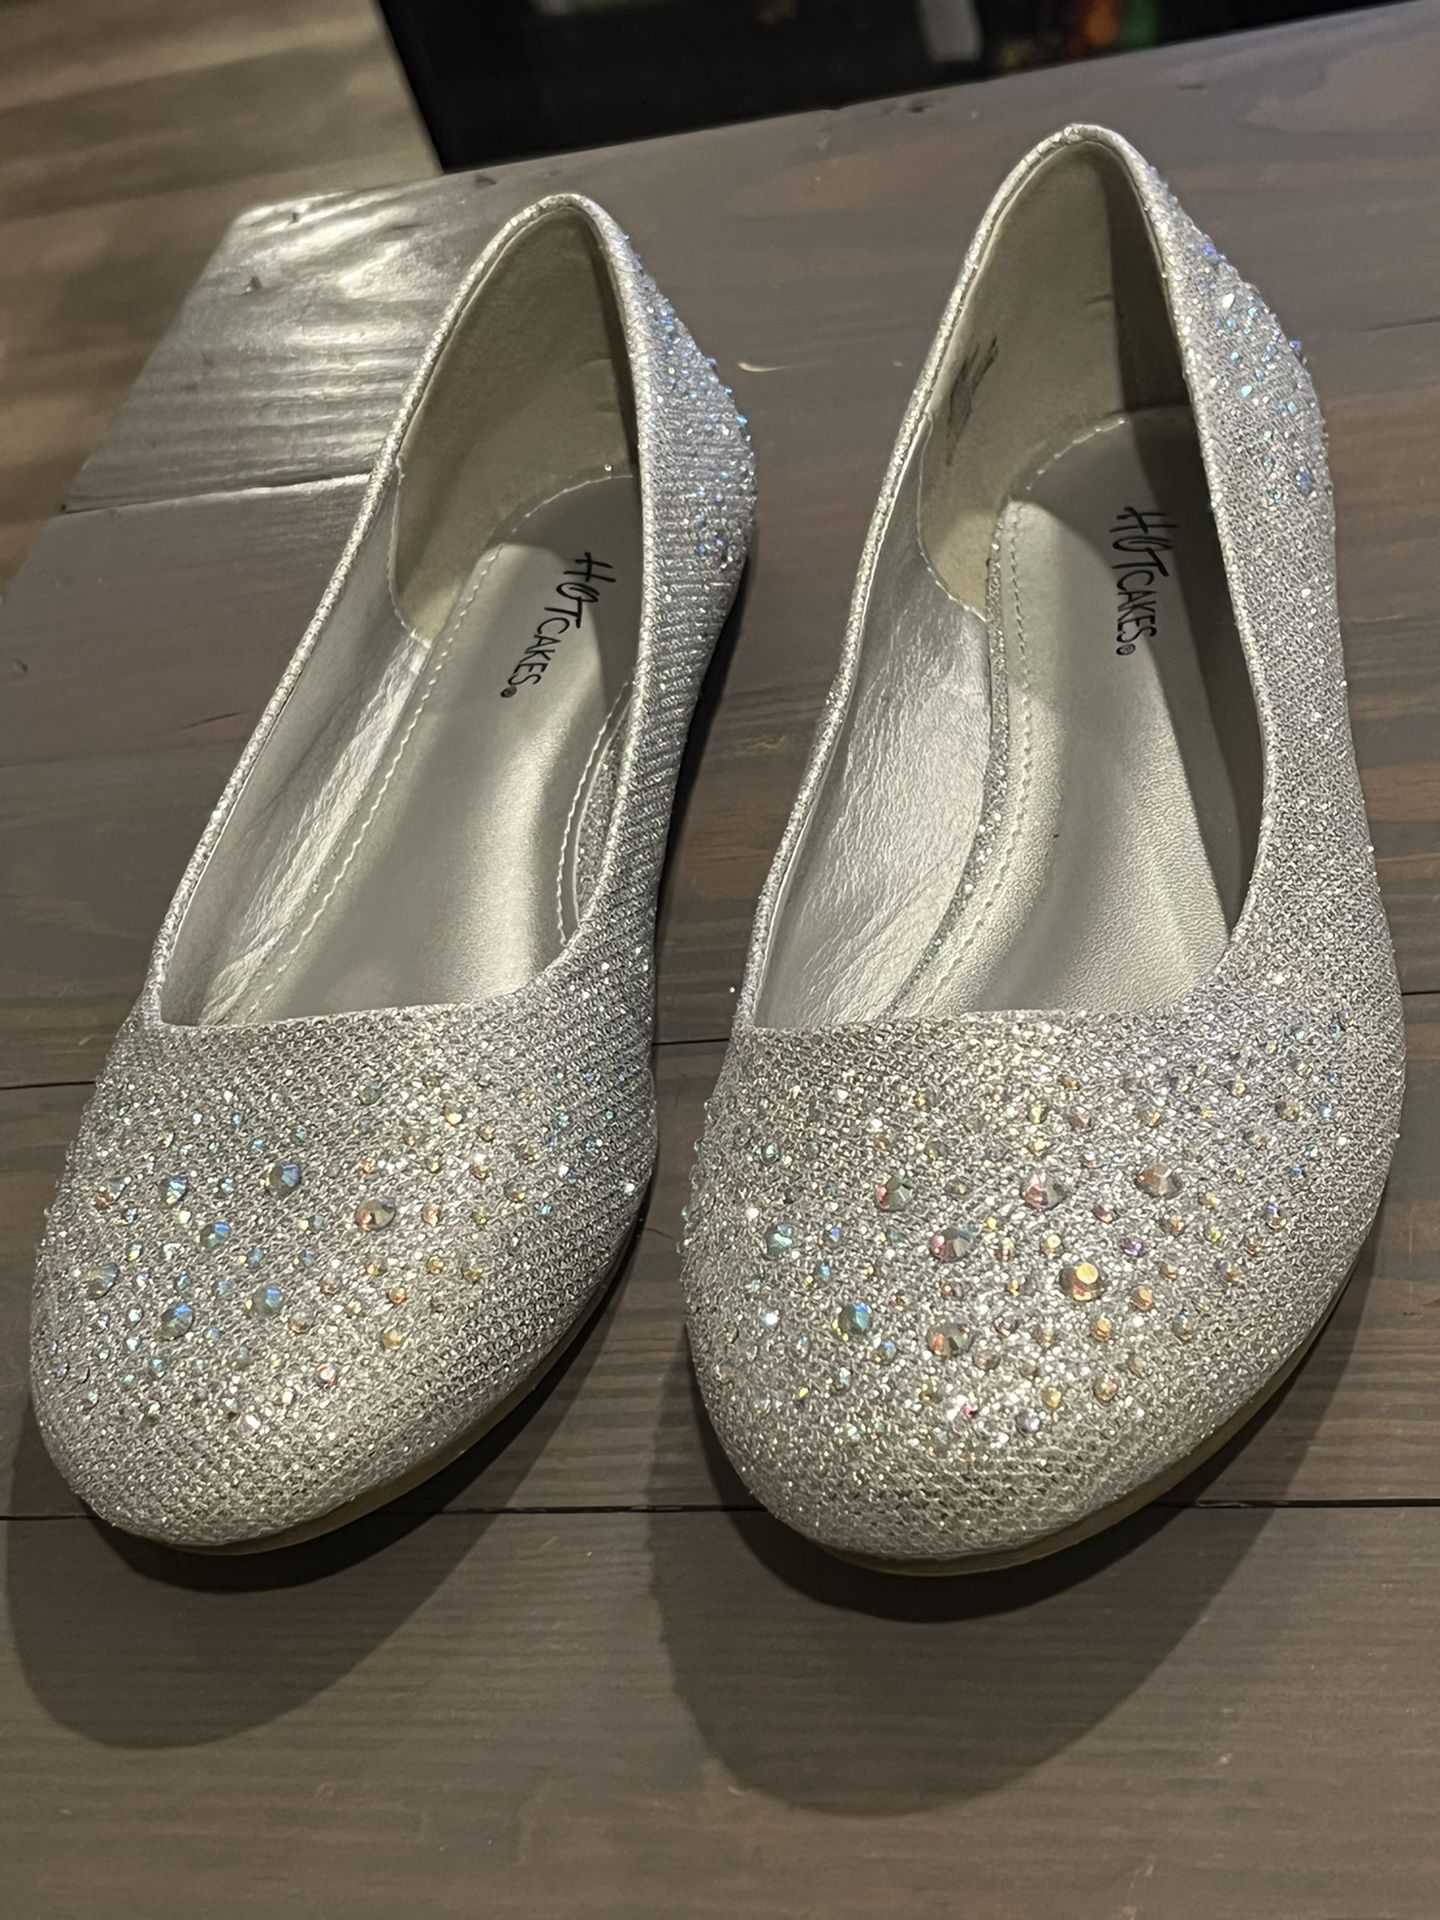 Pair Of Womens Size 9 Silver Flats